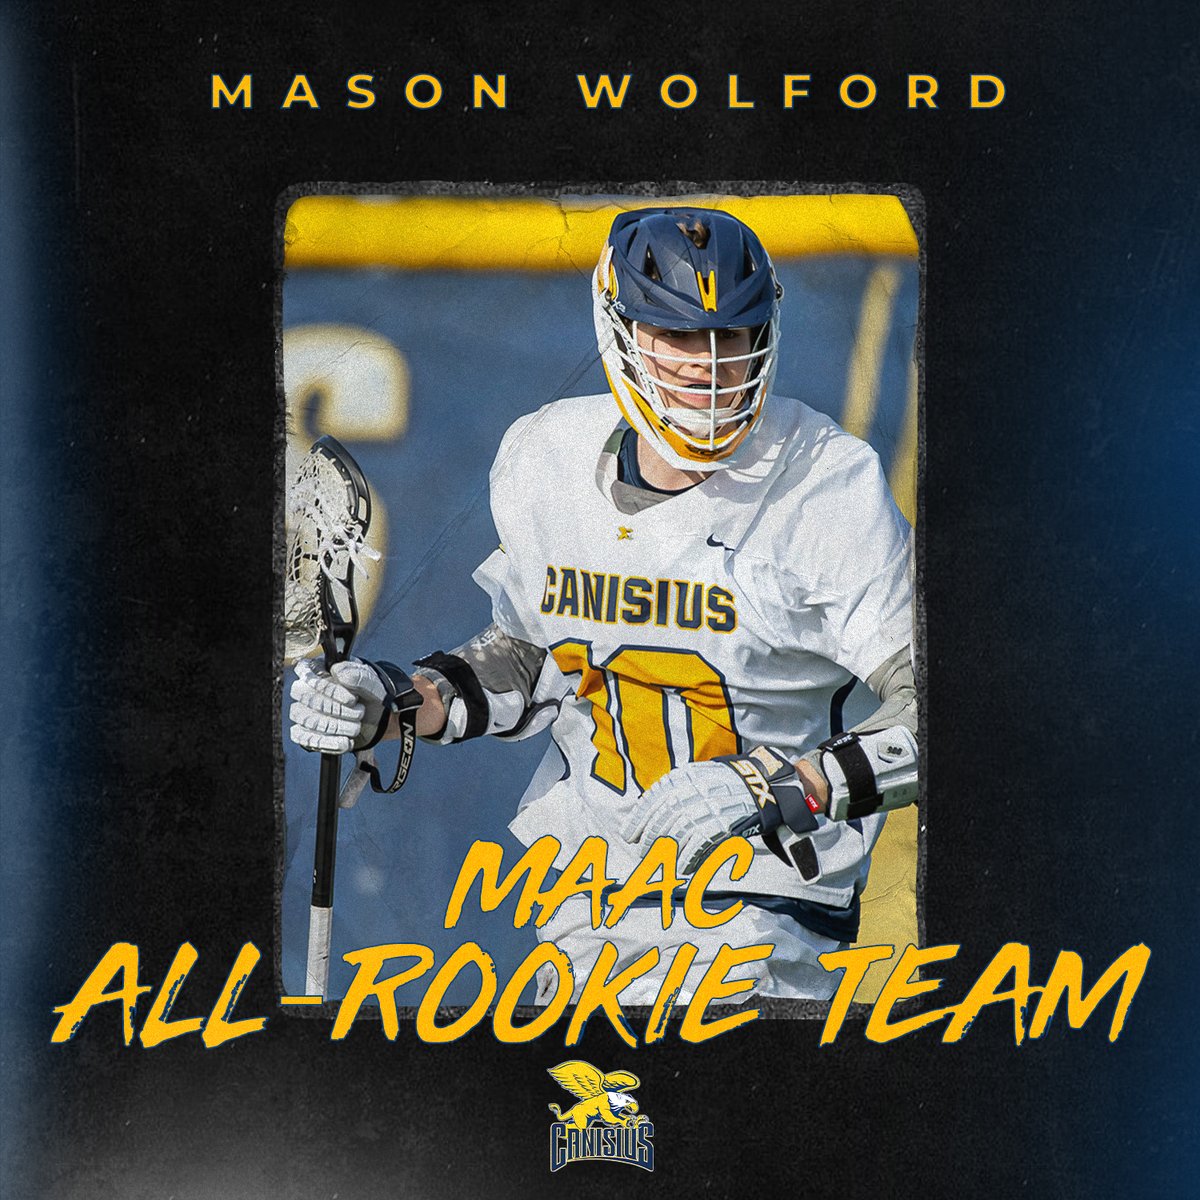 Congratulations to freshman attackman Mason Wolford on being named to the @MAACSports Men's Lacrosse All-Rookie Team! Wolford led the Griffs with 25 goals and ranked second on the squad with 32 points #Griffs